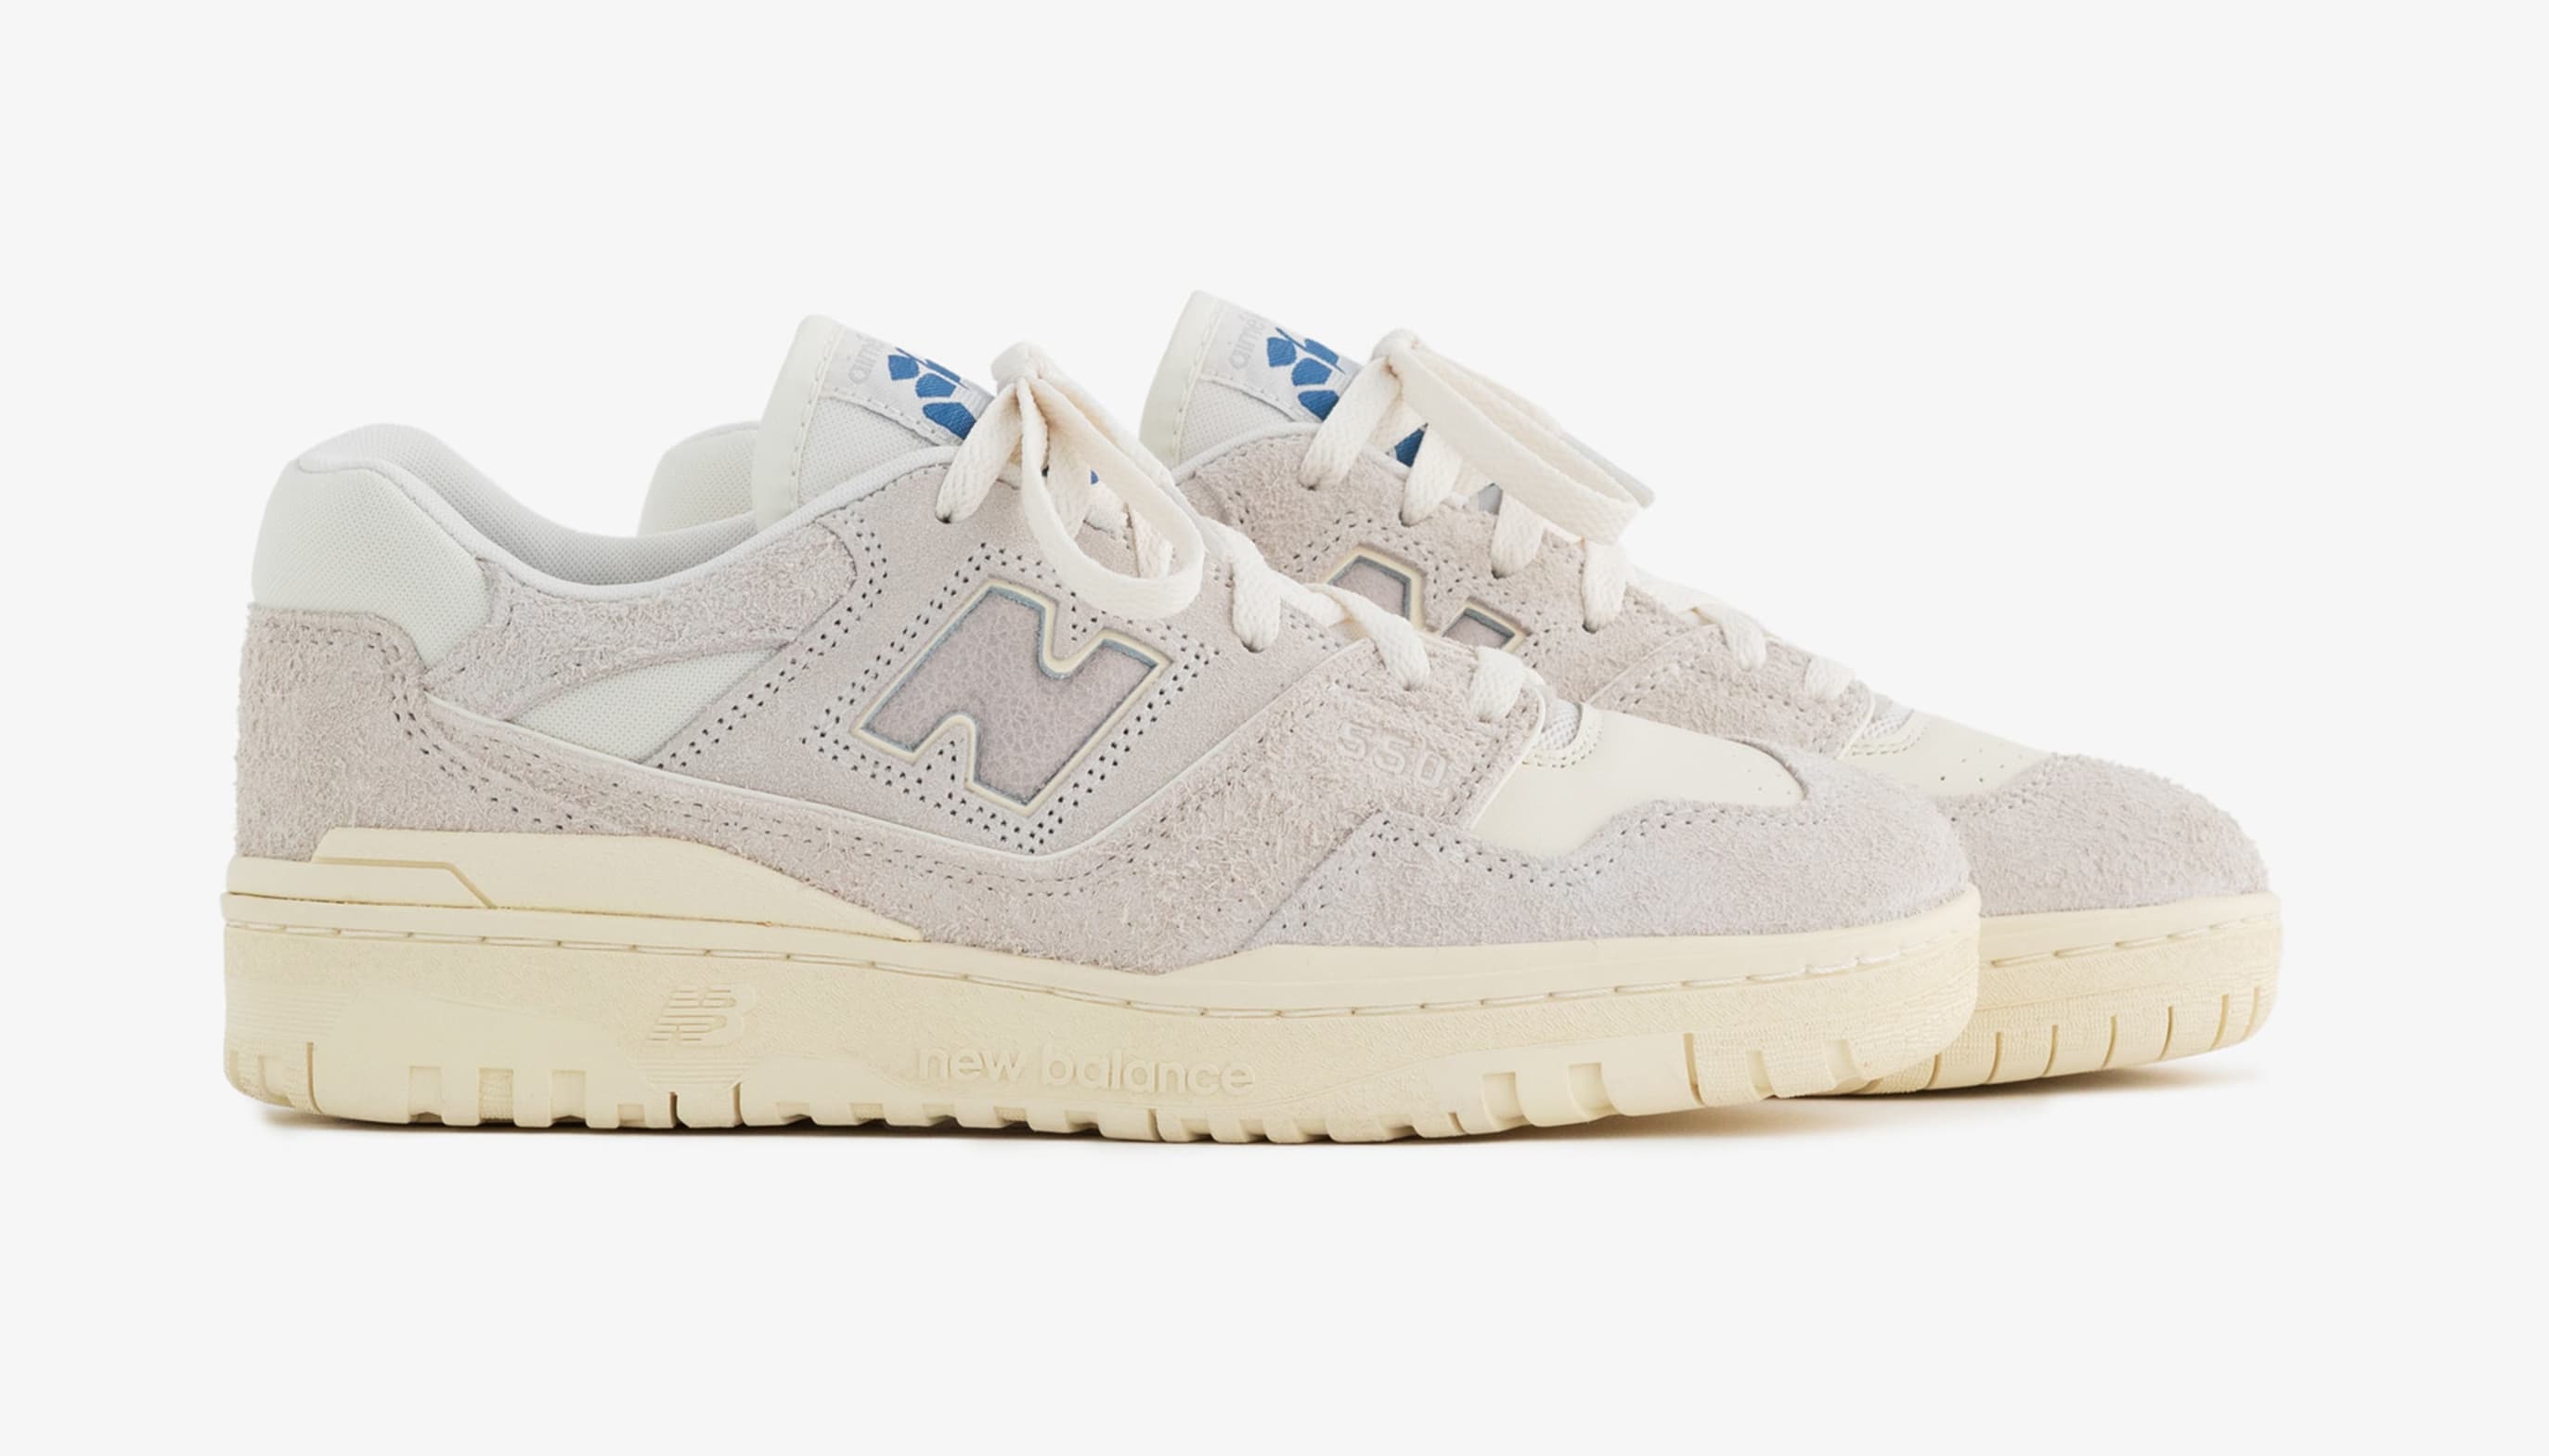 More Colorways Emerge On The Aime Leon Dore x New Balance 550 - Sneaker News